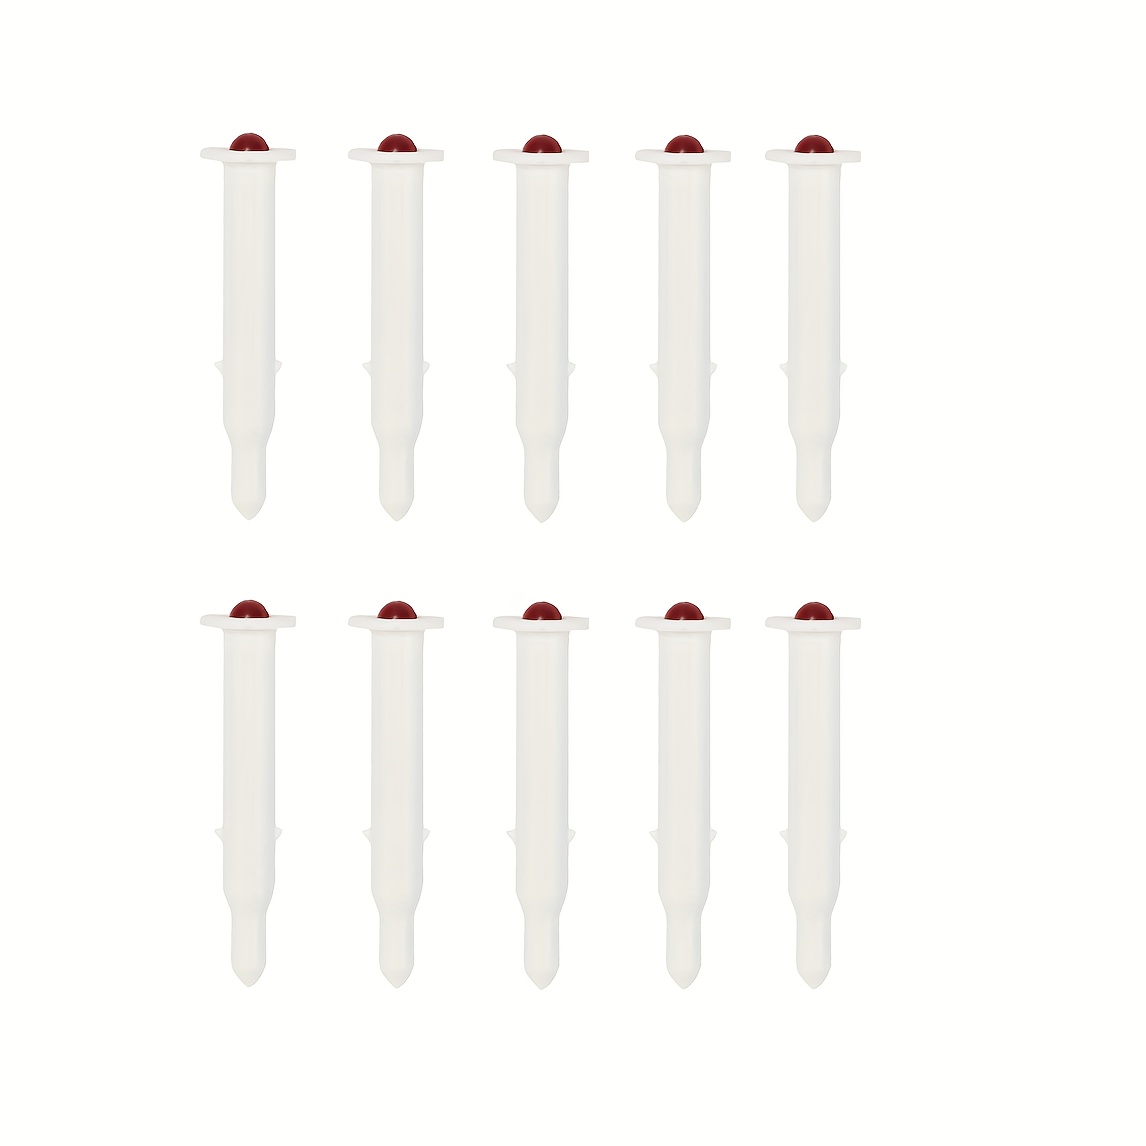 5 x Single Pop-Up Thermometers for Turkey/Poultry